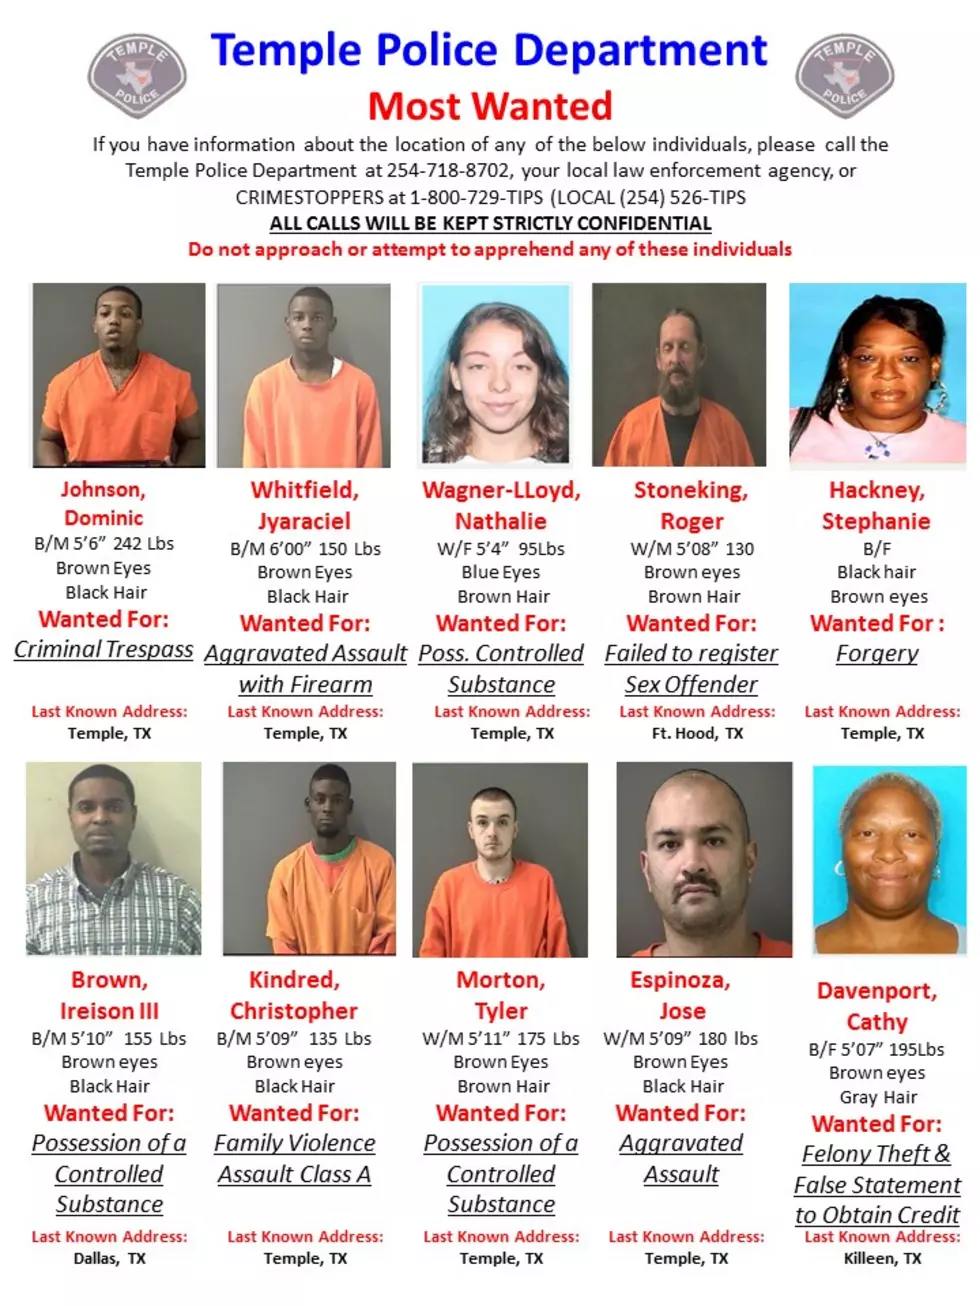 Temple PD’s 10 Most Wanted Criminals